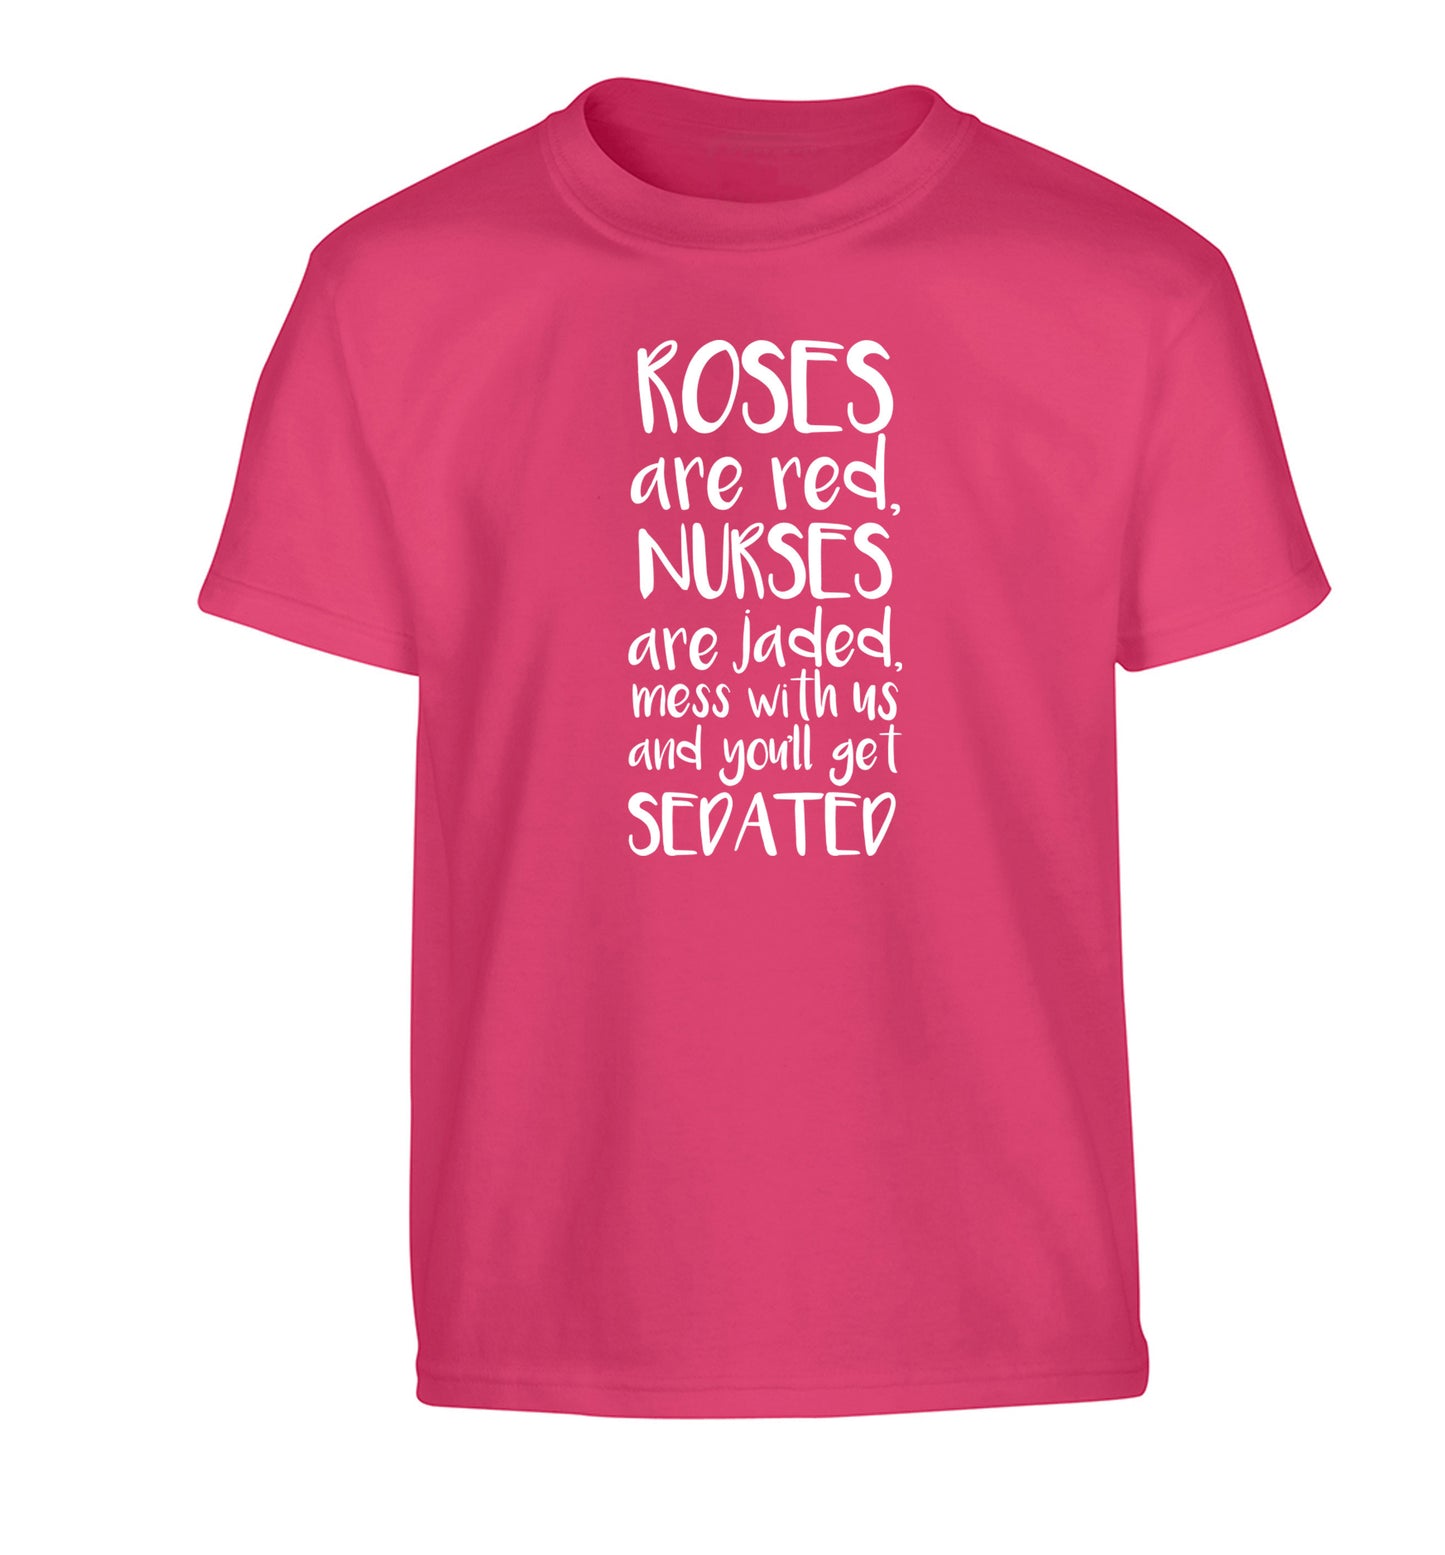 Roses are red, nurses are jaded, mess with us and you'll get sedated Children's pink Tshirt 12-14 Years